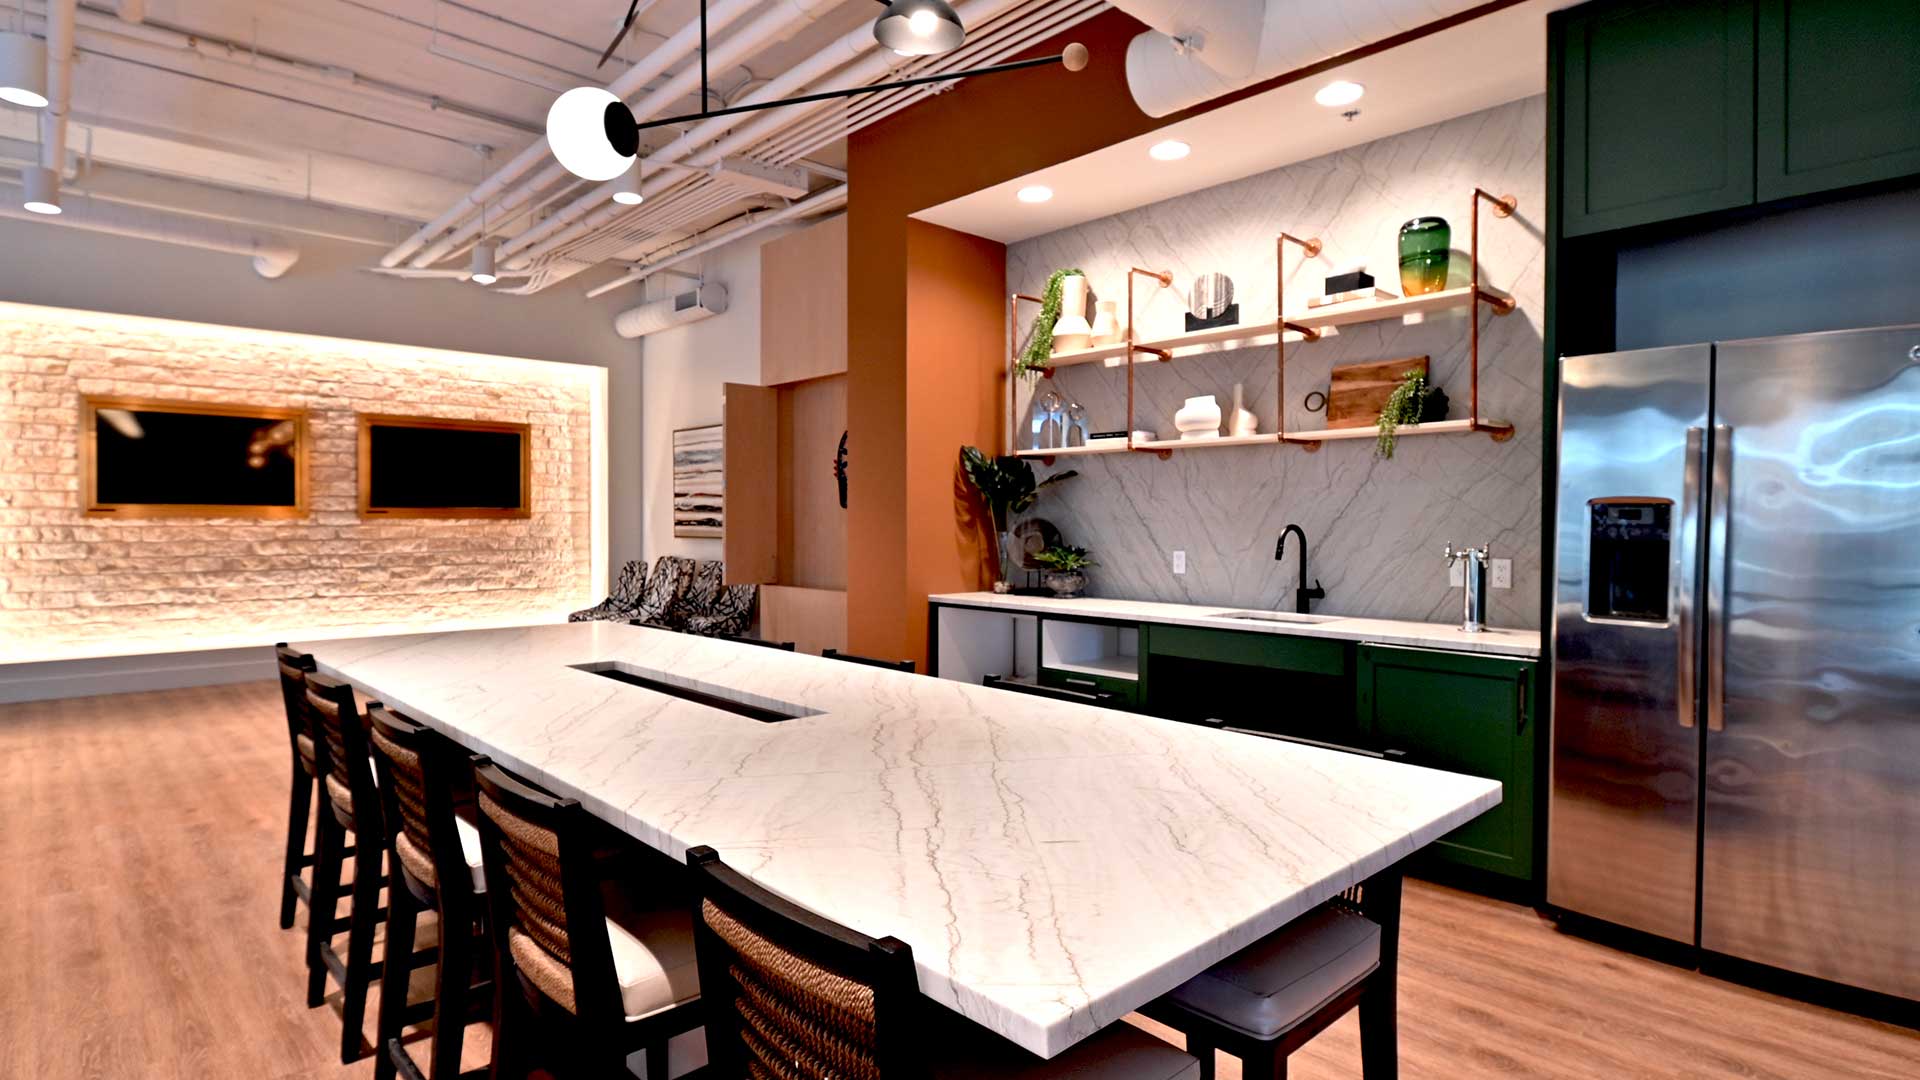 A large marble dining table sits in front of a wet bar with a large stainless steel refrigerator to the right.